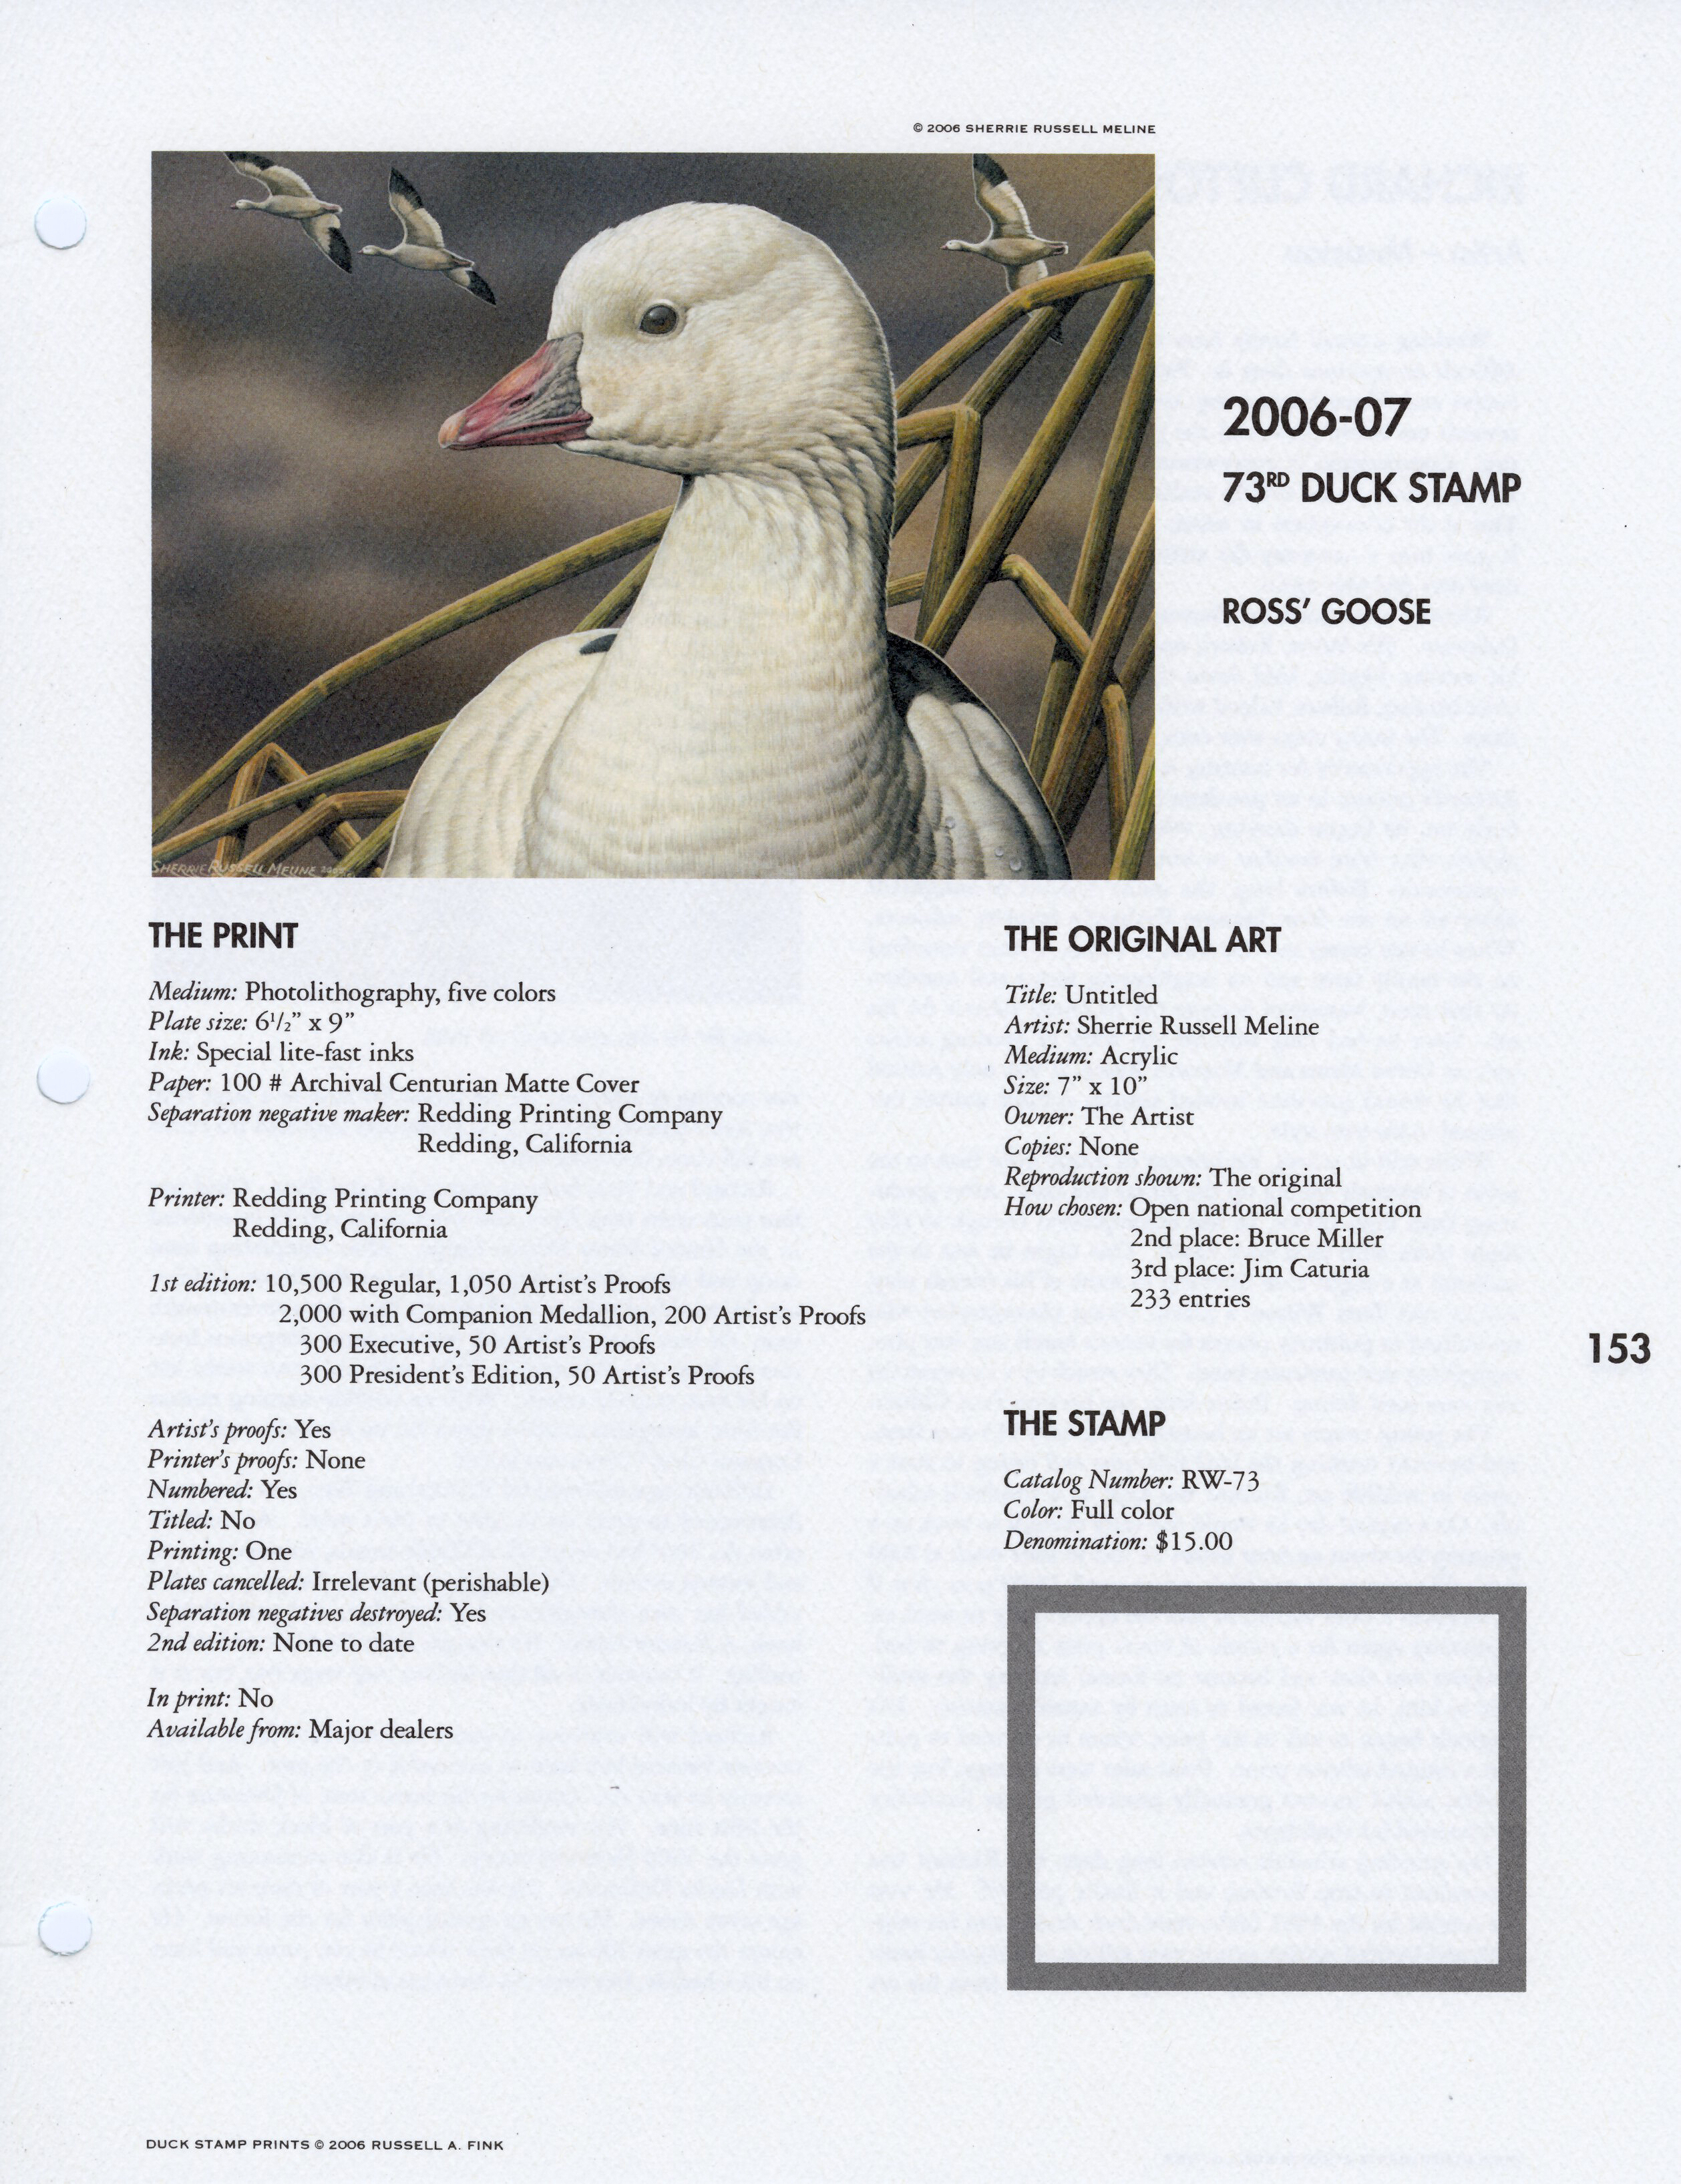 2006-07 Ross' Geese by Sherrie Meline